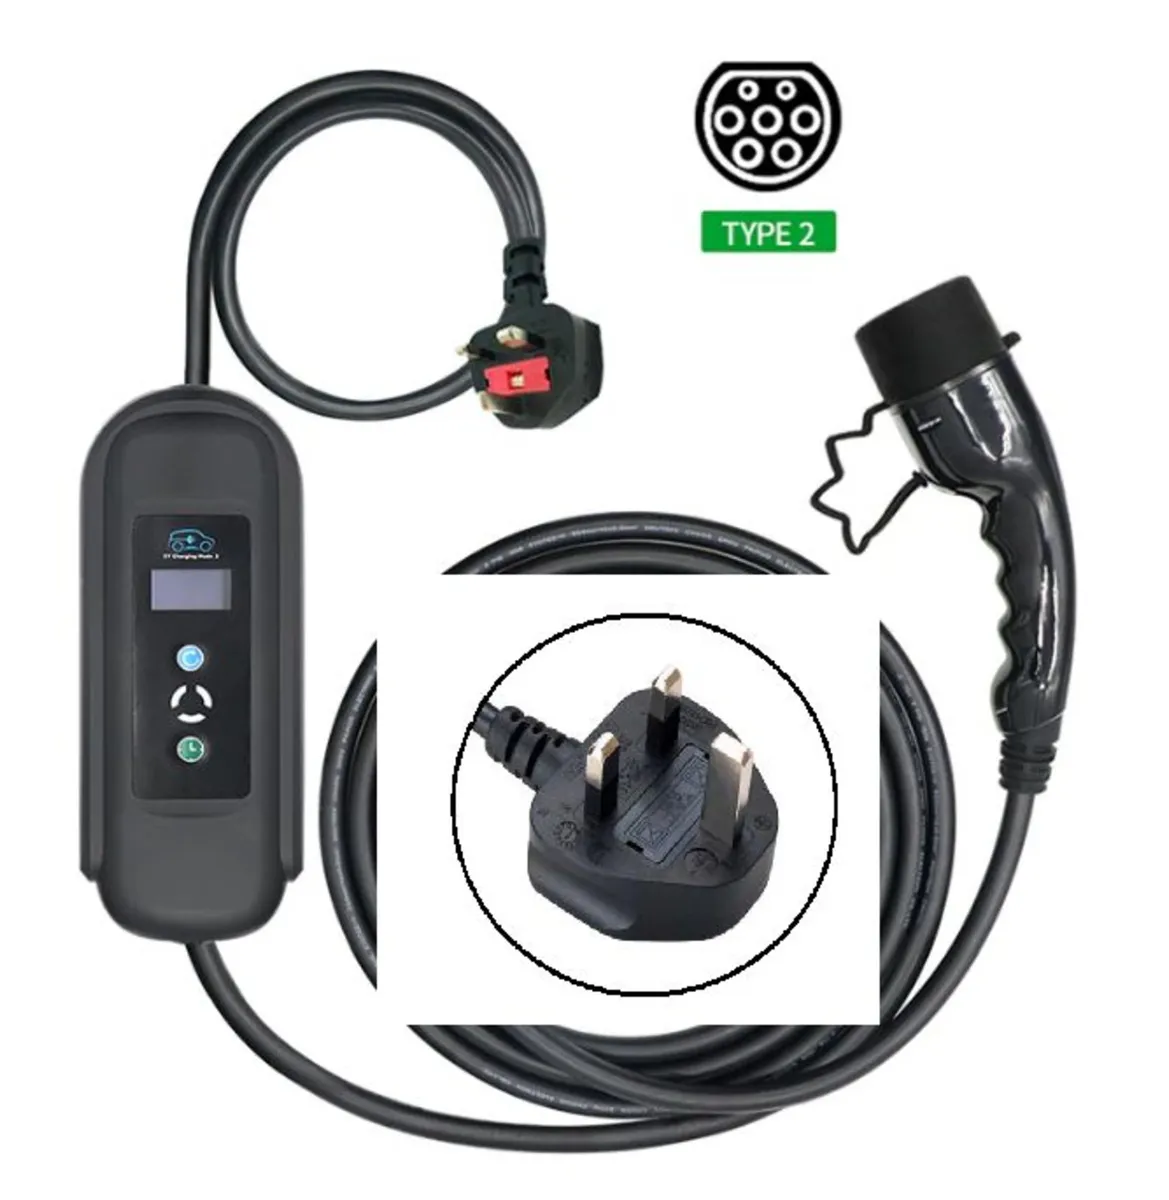 Electric Vehicle Charger, Granny Cable, We Deliver, Type 2 - Image 1